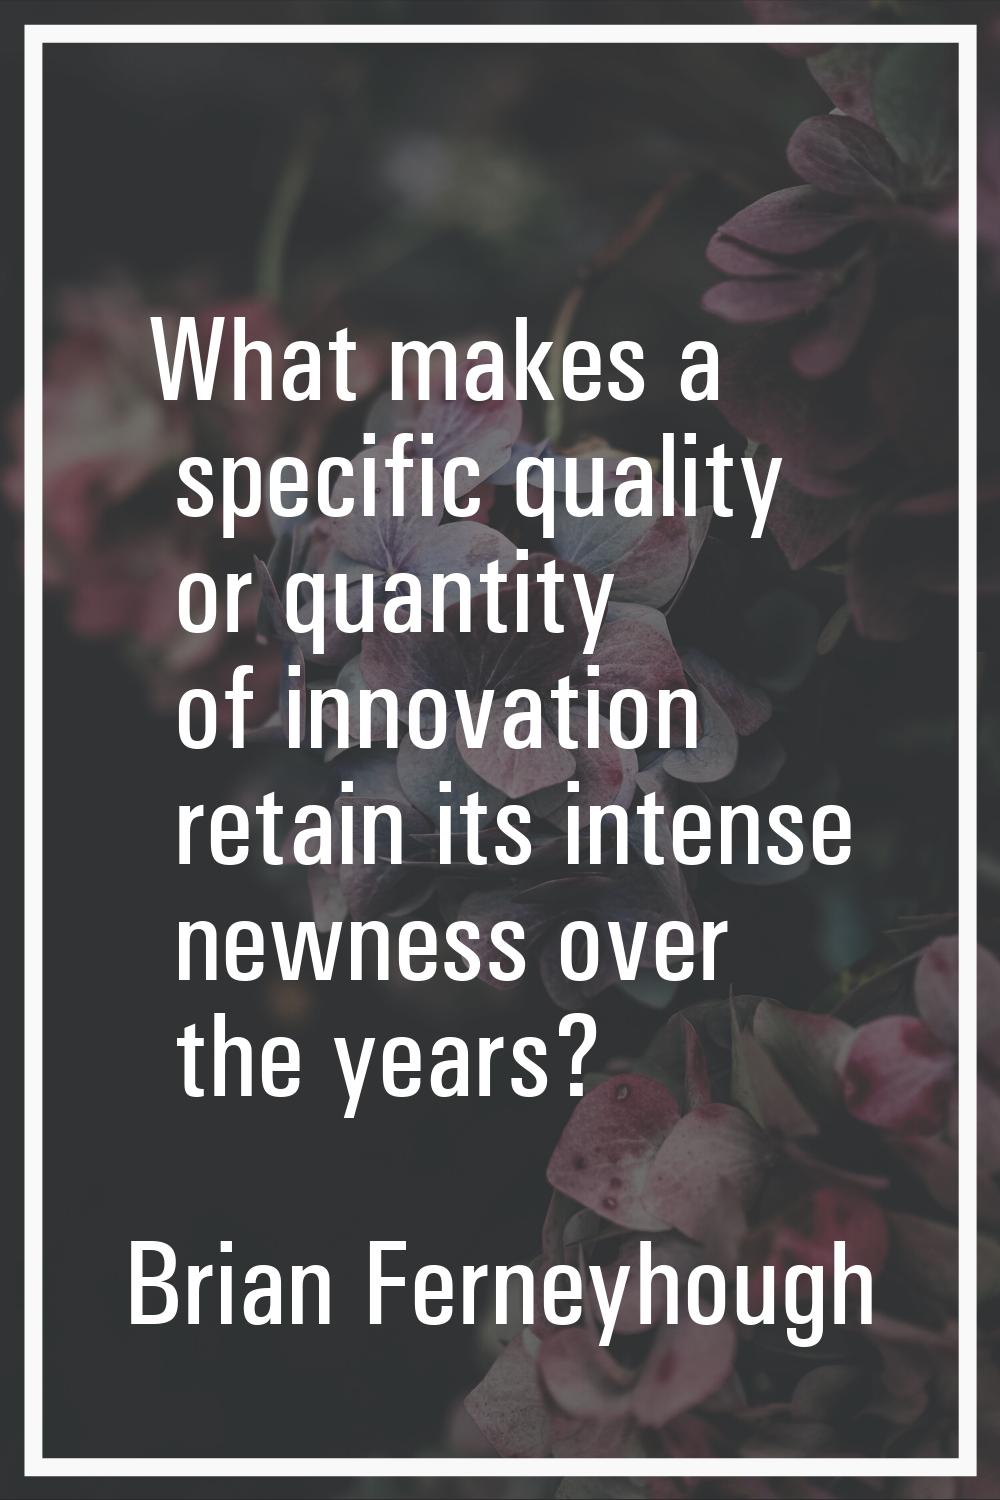 What makes a specific quality or quantity of innovation retain its intense newness over the years?